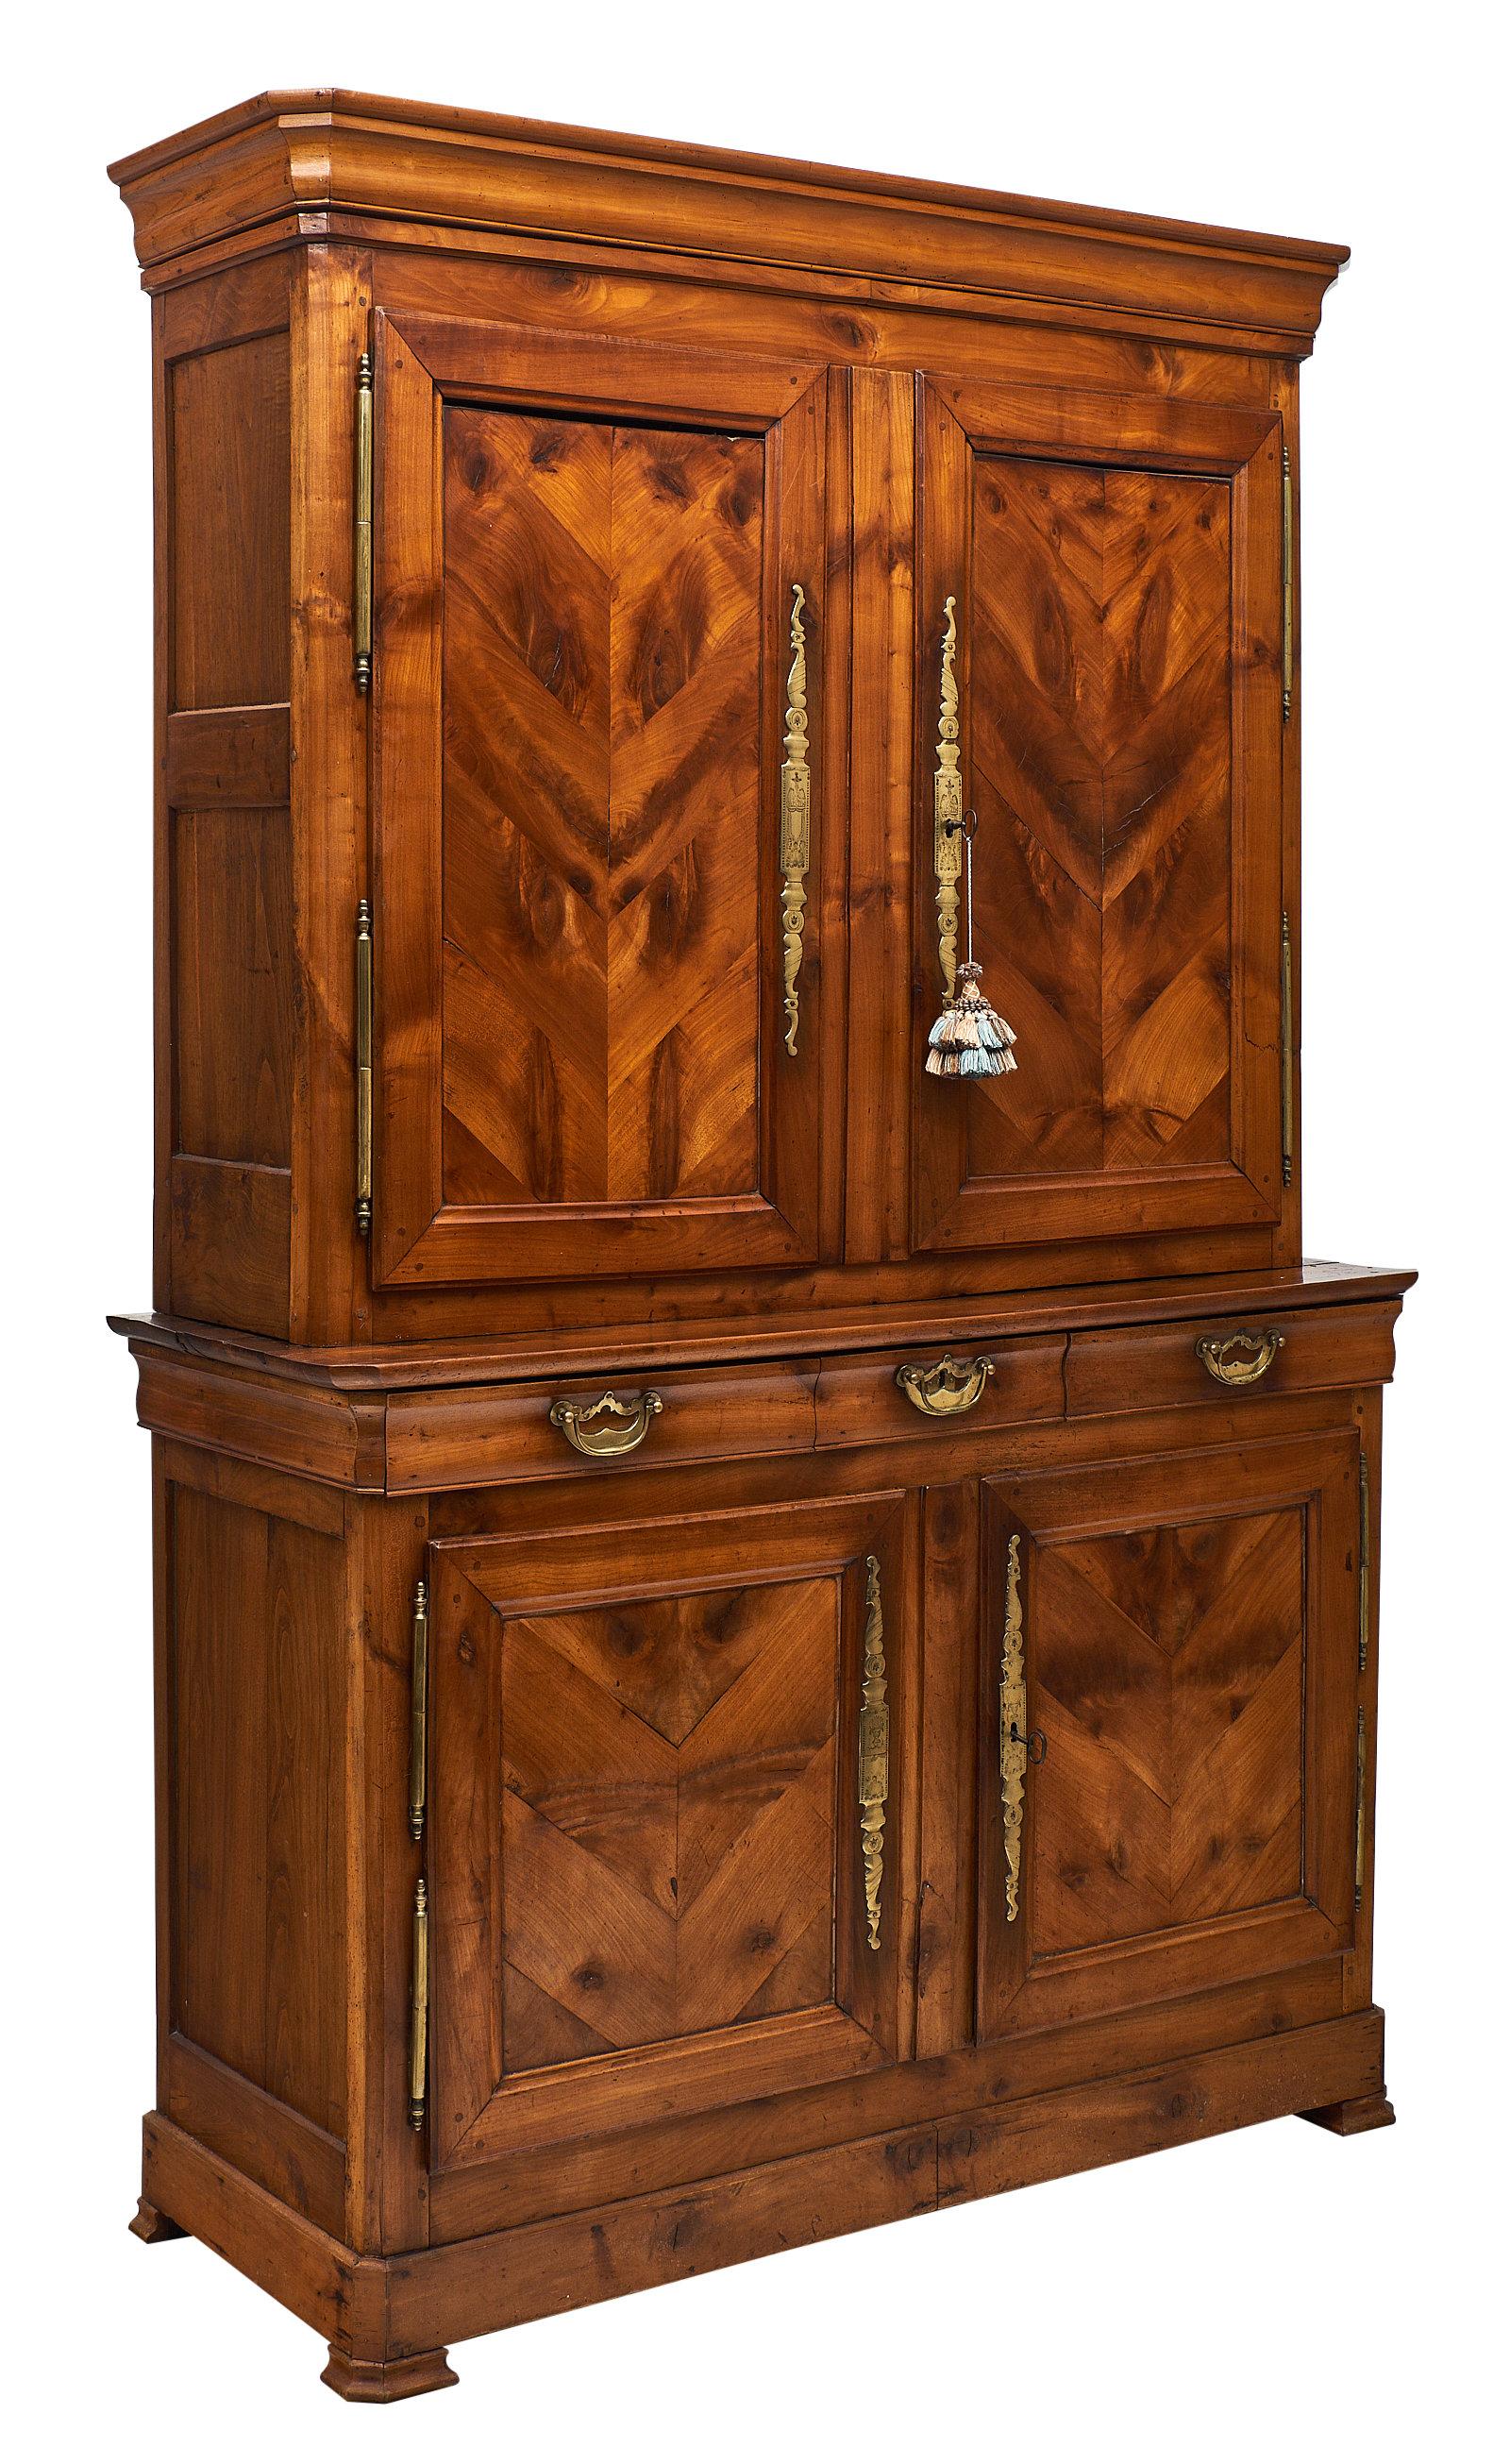 French Restauration style double corps buffet made of solid walnut and featuring engraved bronze hardware. We love the beautiful warm wood and classic antique details of this impressive piece. The doors have a working lock and key, and open to